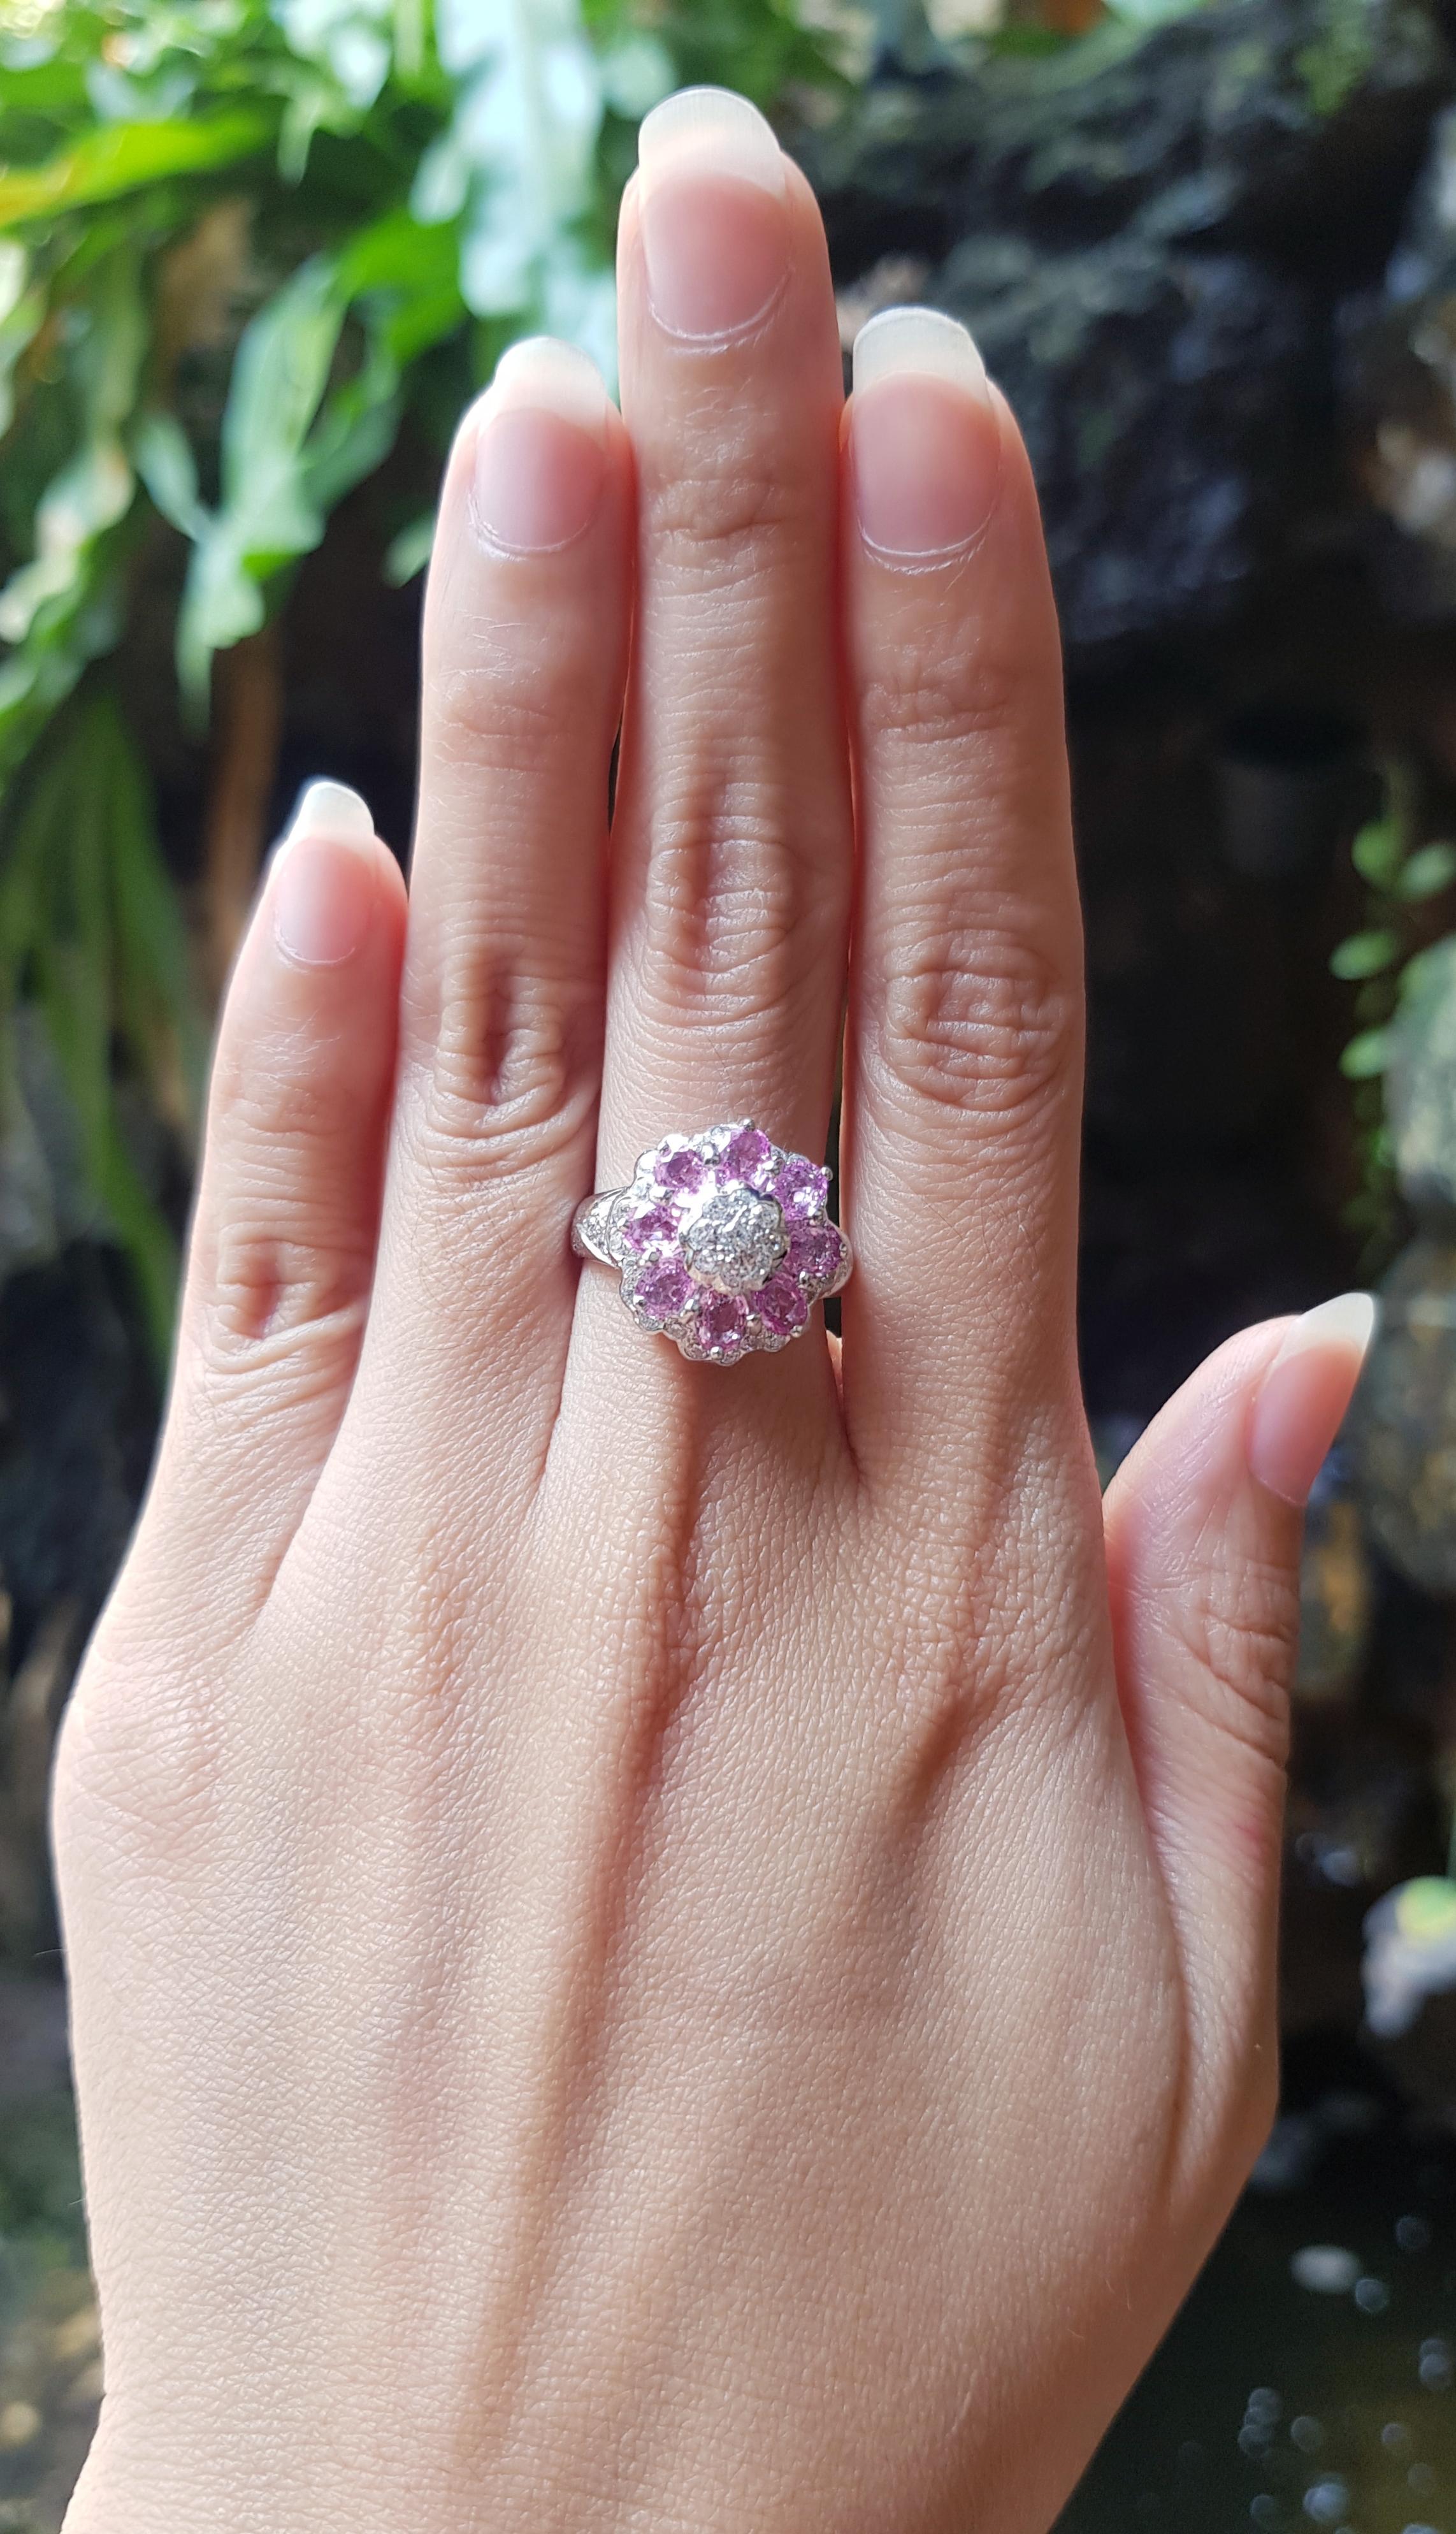 Pink Sapphire with Cubic Zirconia Ring set in Silver Settings

Width:  1.6 cm 
Length: 1.6 cm
Ring Size: 53
Total Weight: 5.05 grams

*Please note that the silver setting is plated with rhodium to promote shine and help prevent oxidation.  However,